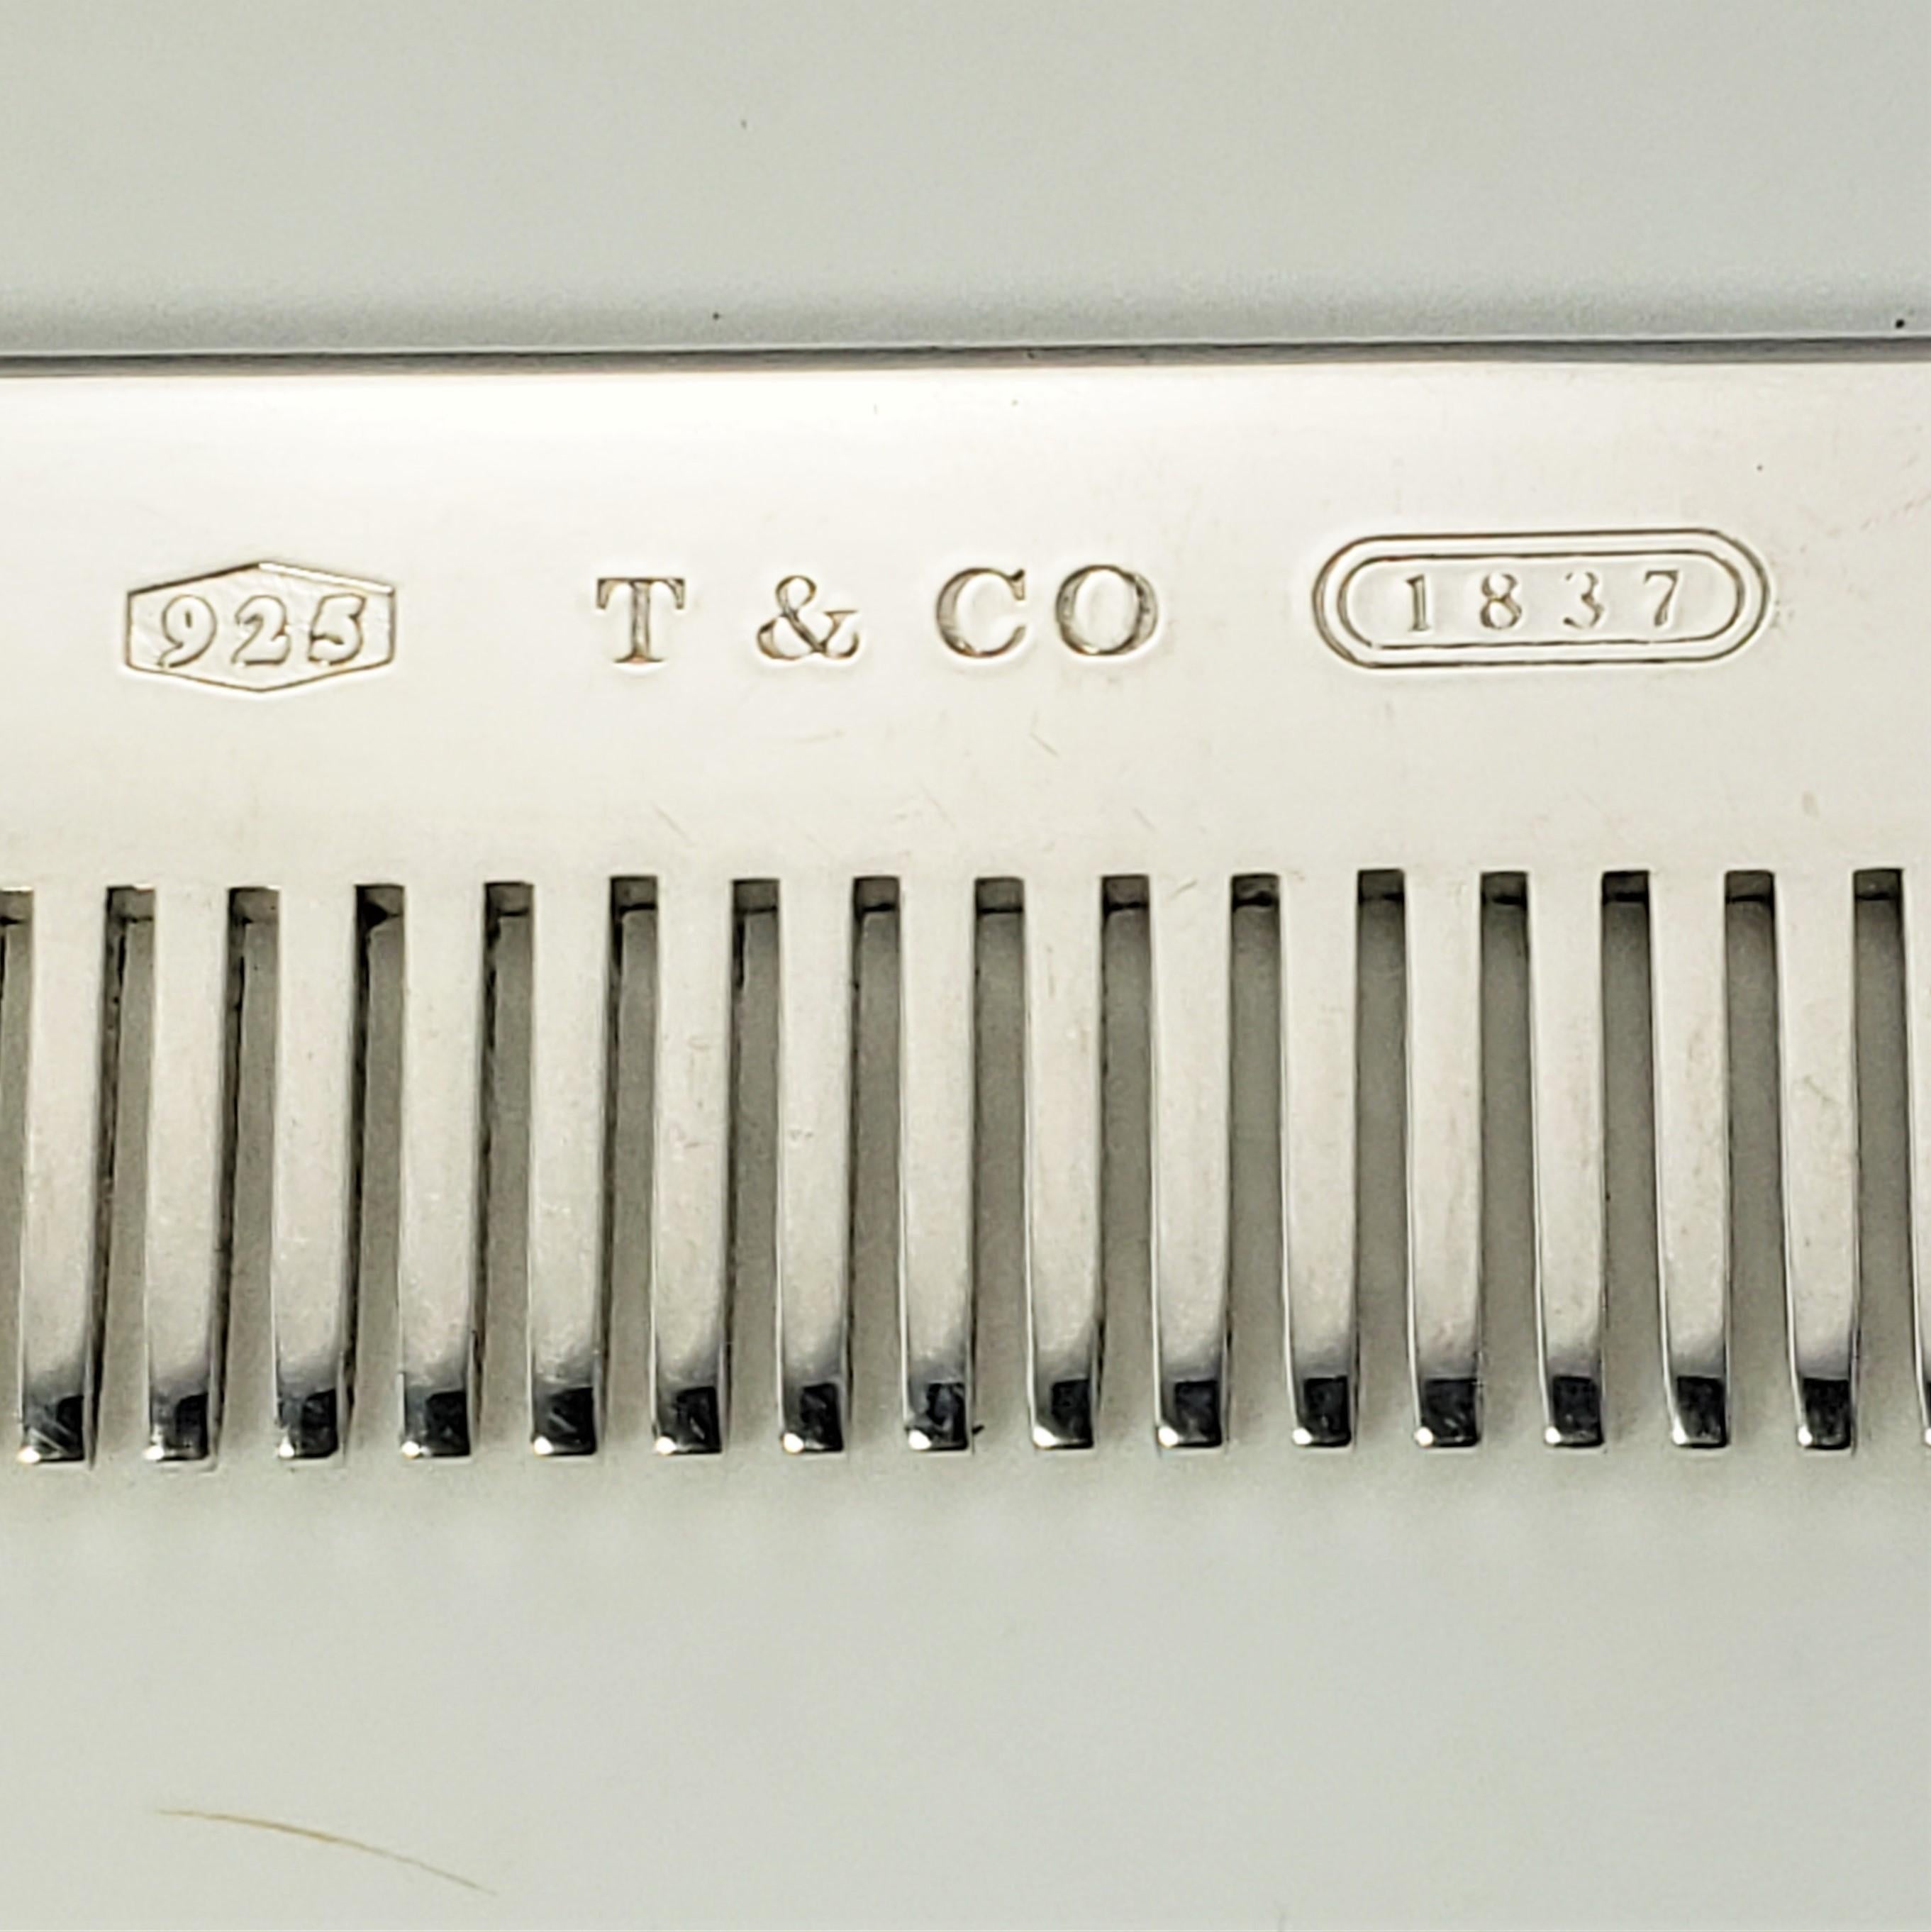 tiffany and co comb